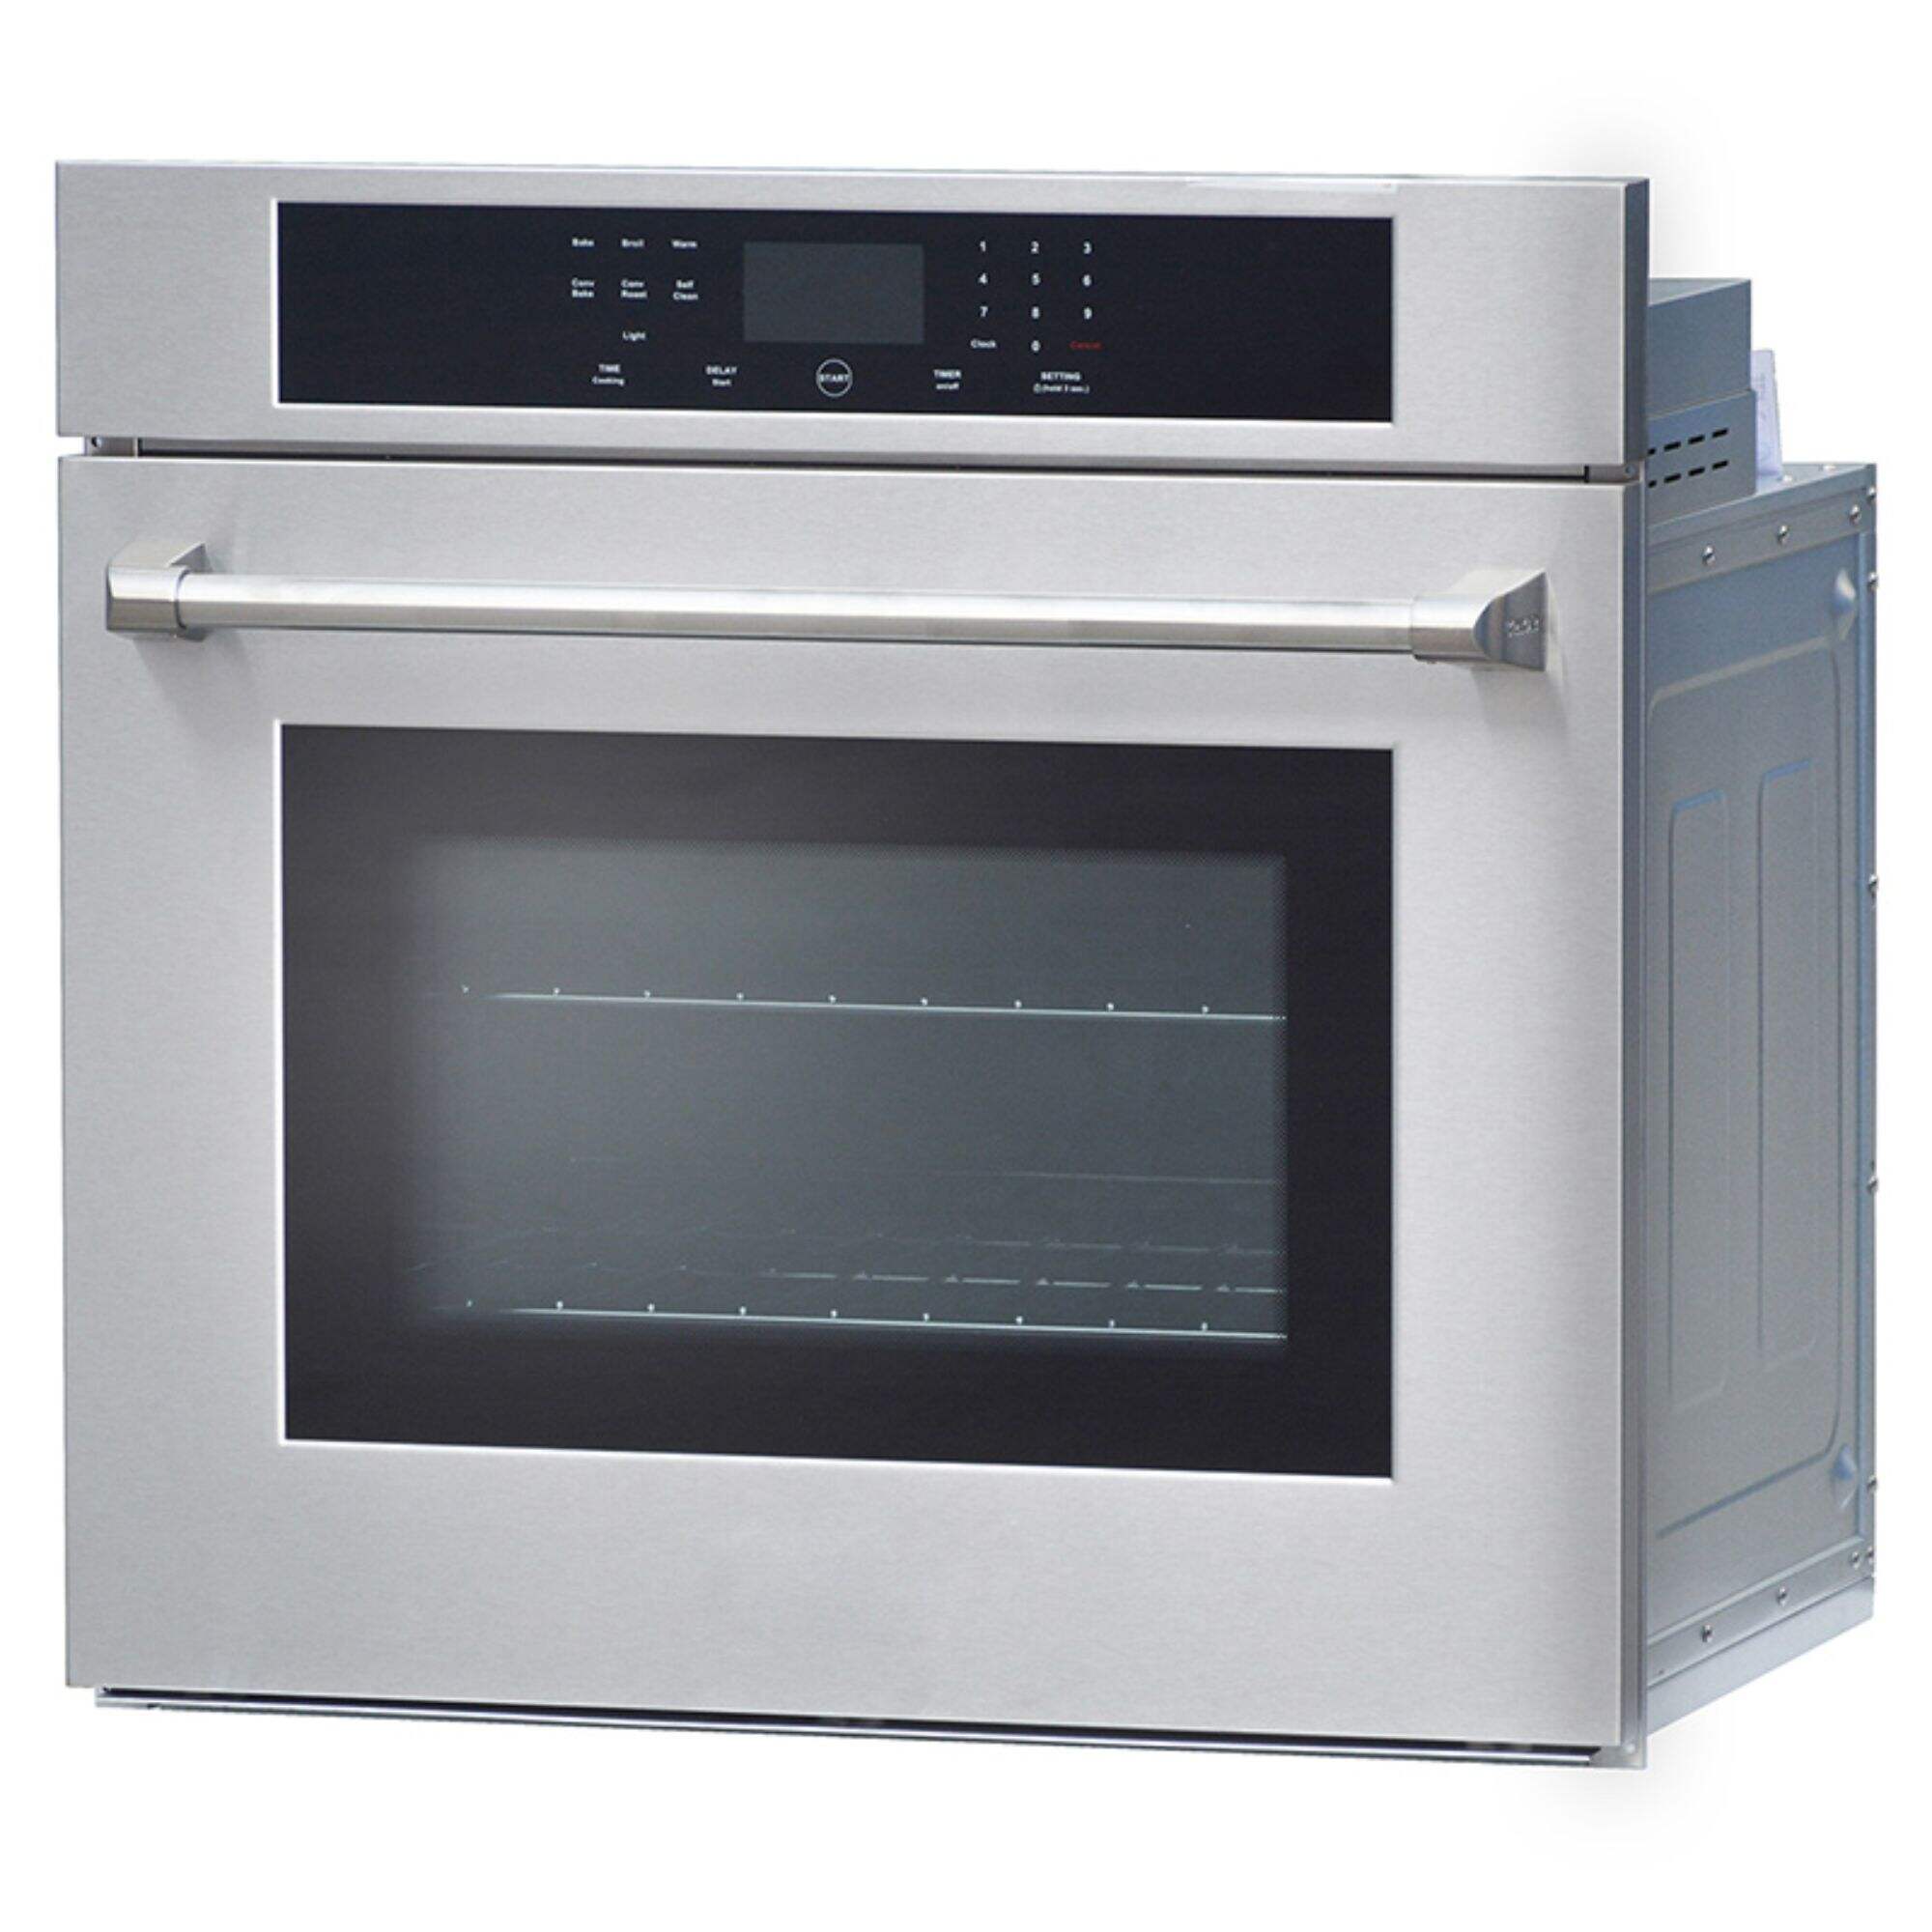 Comparison of the pros and cons of Wall oven and Range Stove